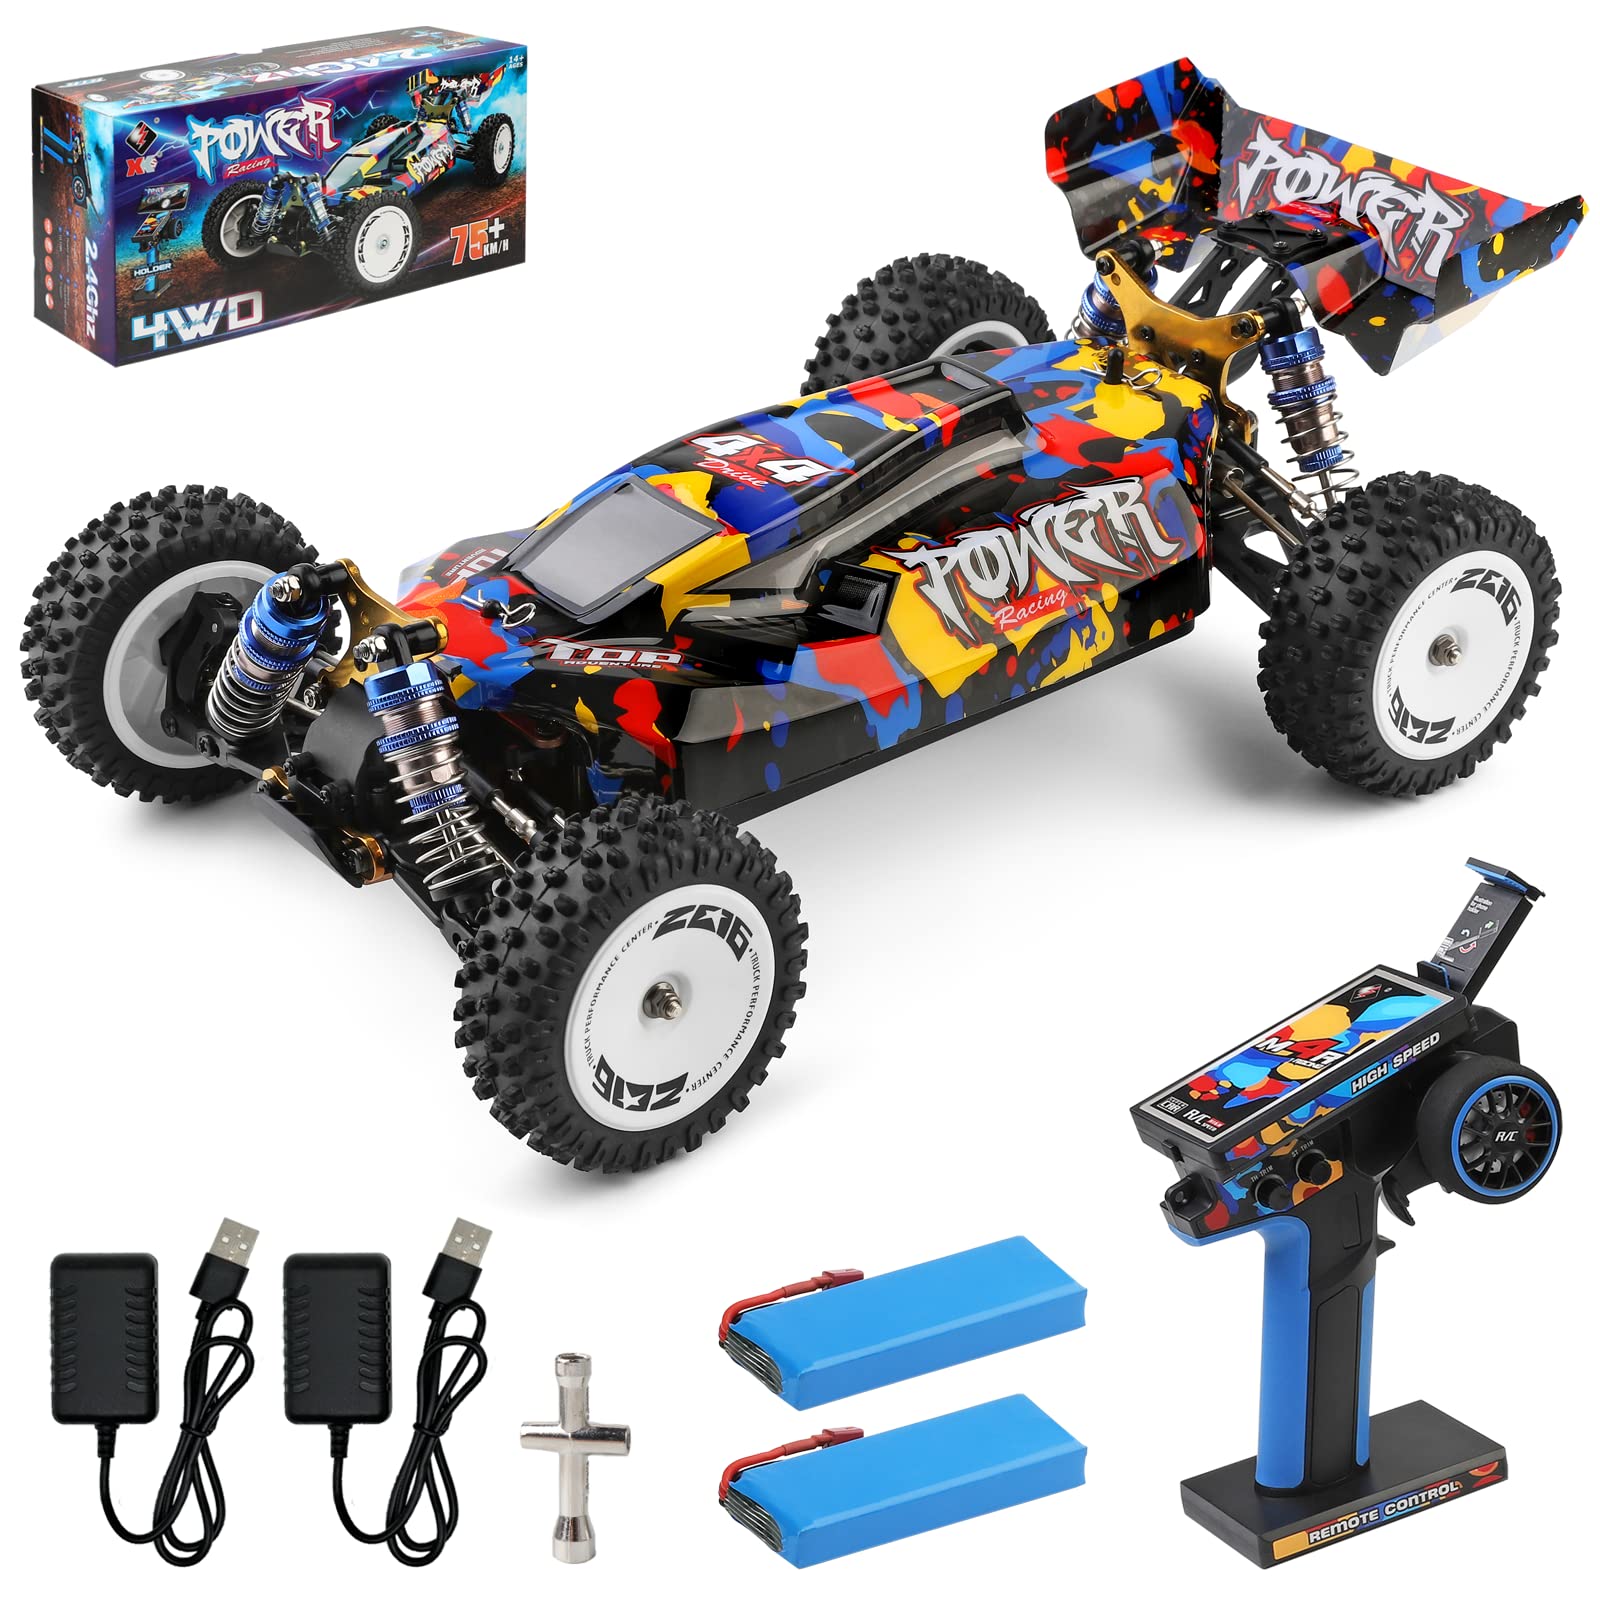 Wltoys 124017 124007 1/12 2.4G Racing RC Cars 4WD Brushless Motor